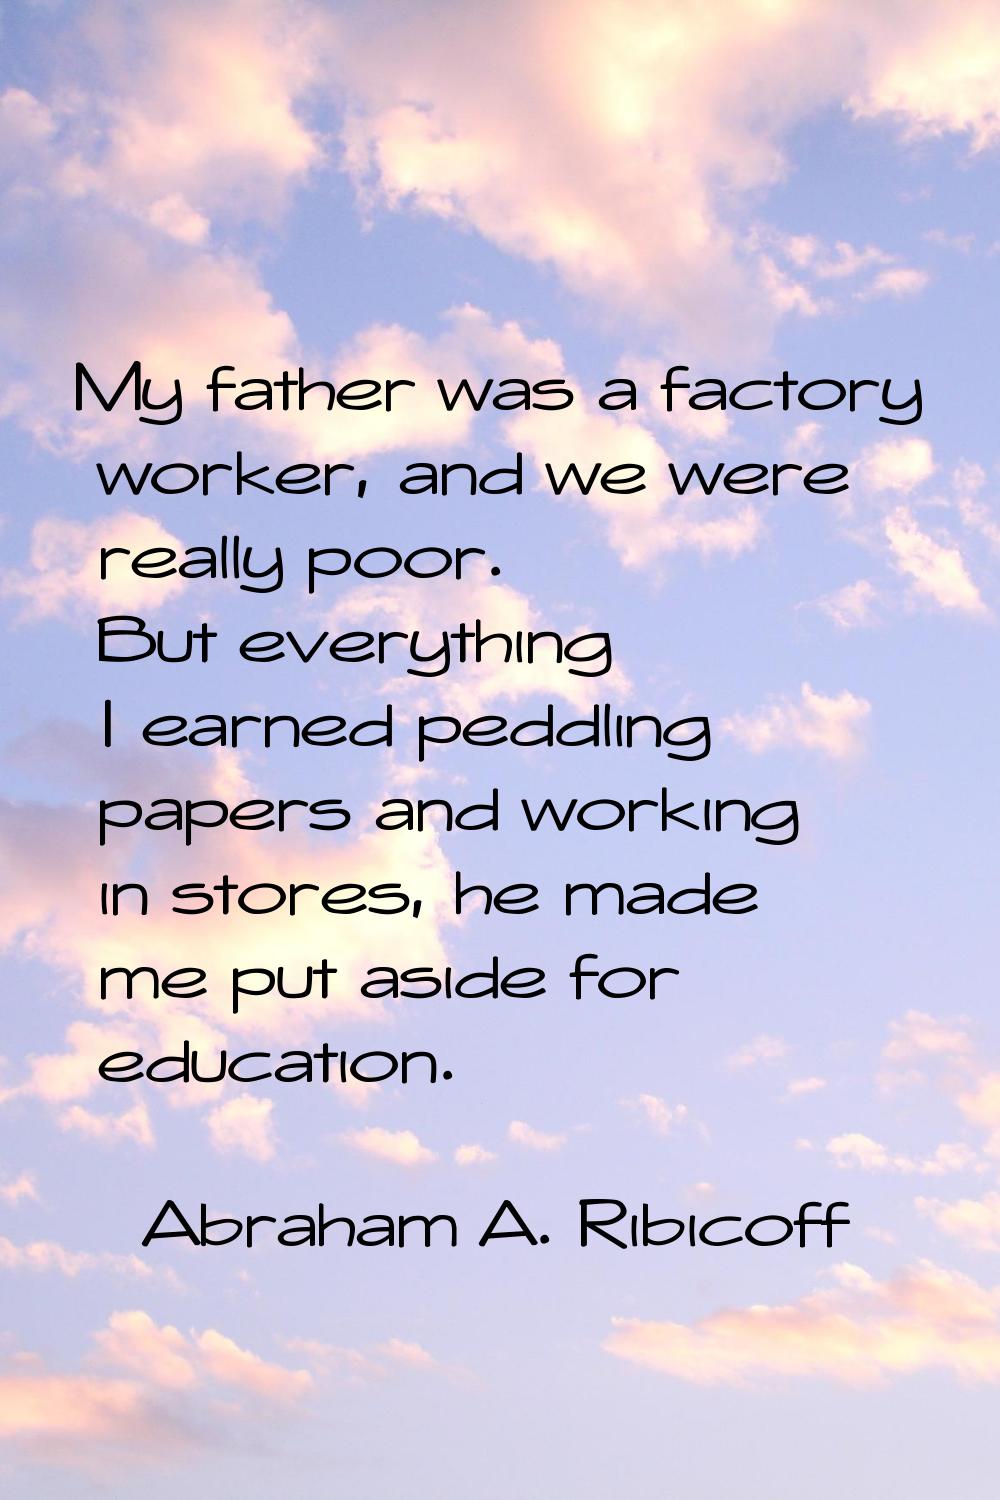 My father was a factory worker, and we were really poor. But everything I earned peddling papers an